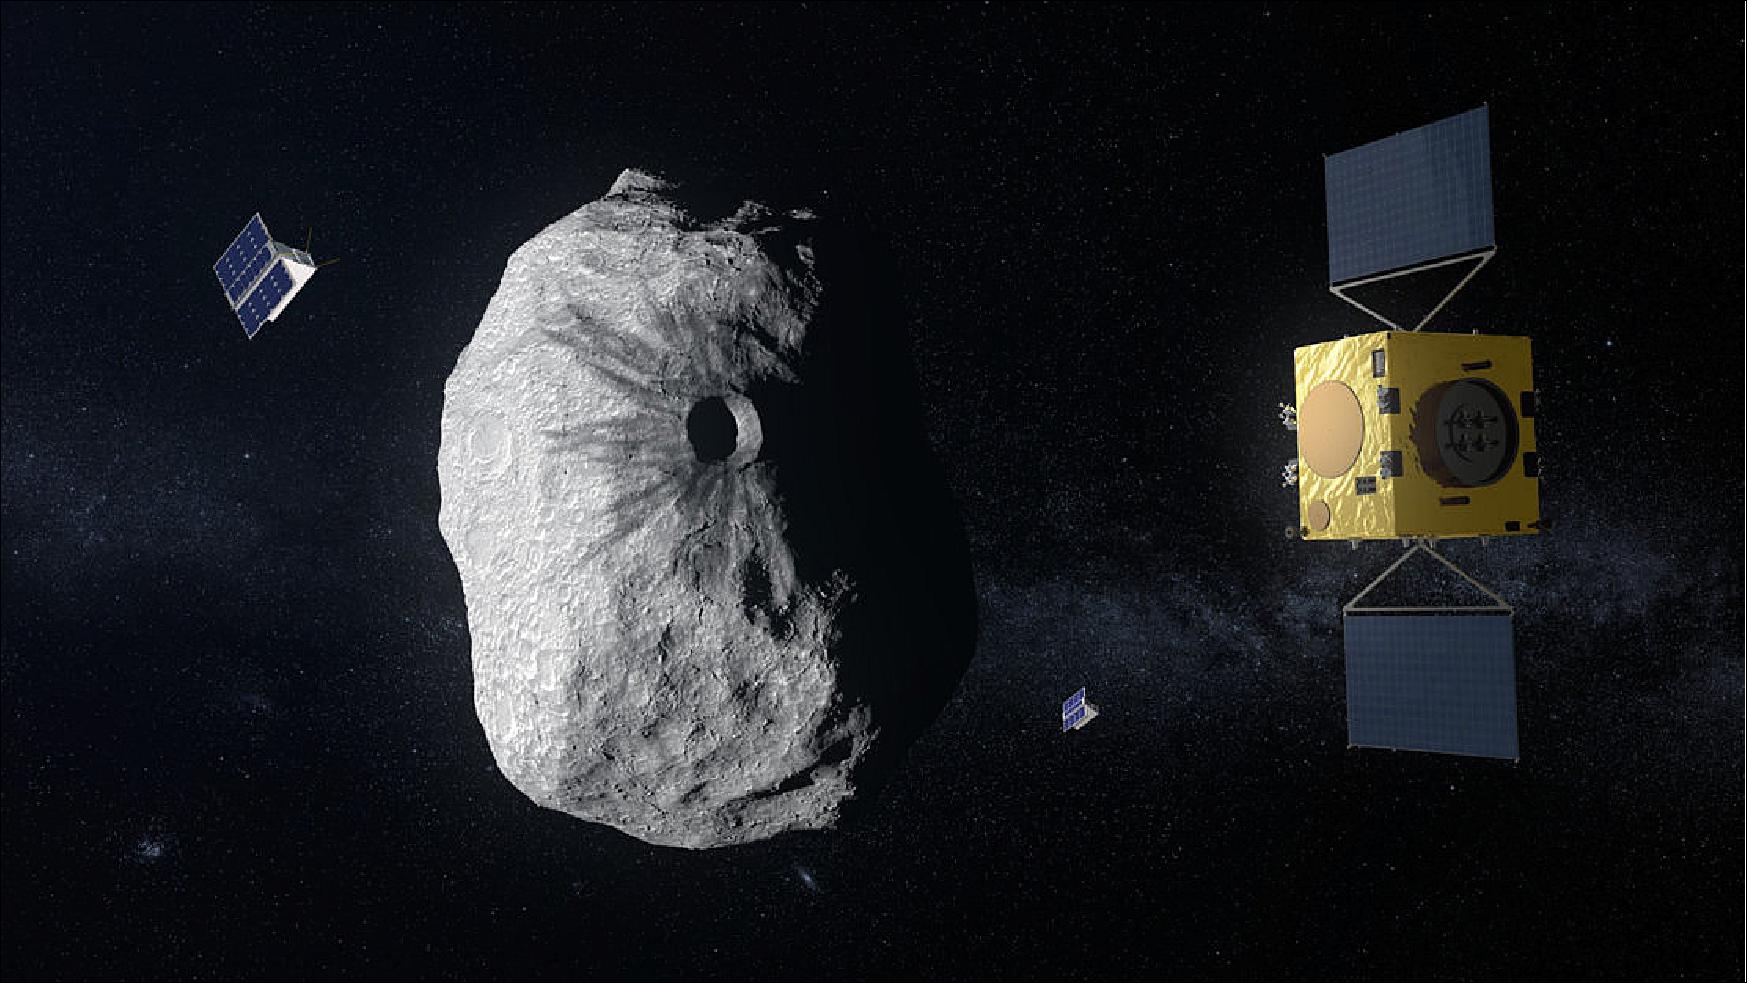 Figure 1: In 2022, NASA’s DART (Double Asteroid Redirection Test) mission collides with the smaller body of the Didymos binary asteroid system in an attempt to measurably shift its orbit (image credit: ESA–ScienceOffice.org)